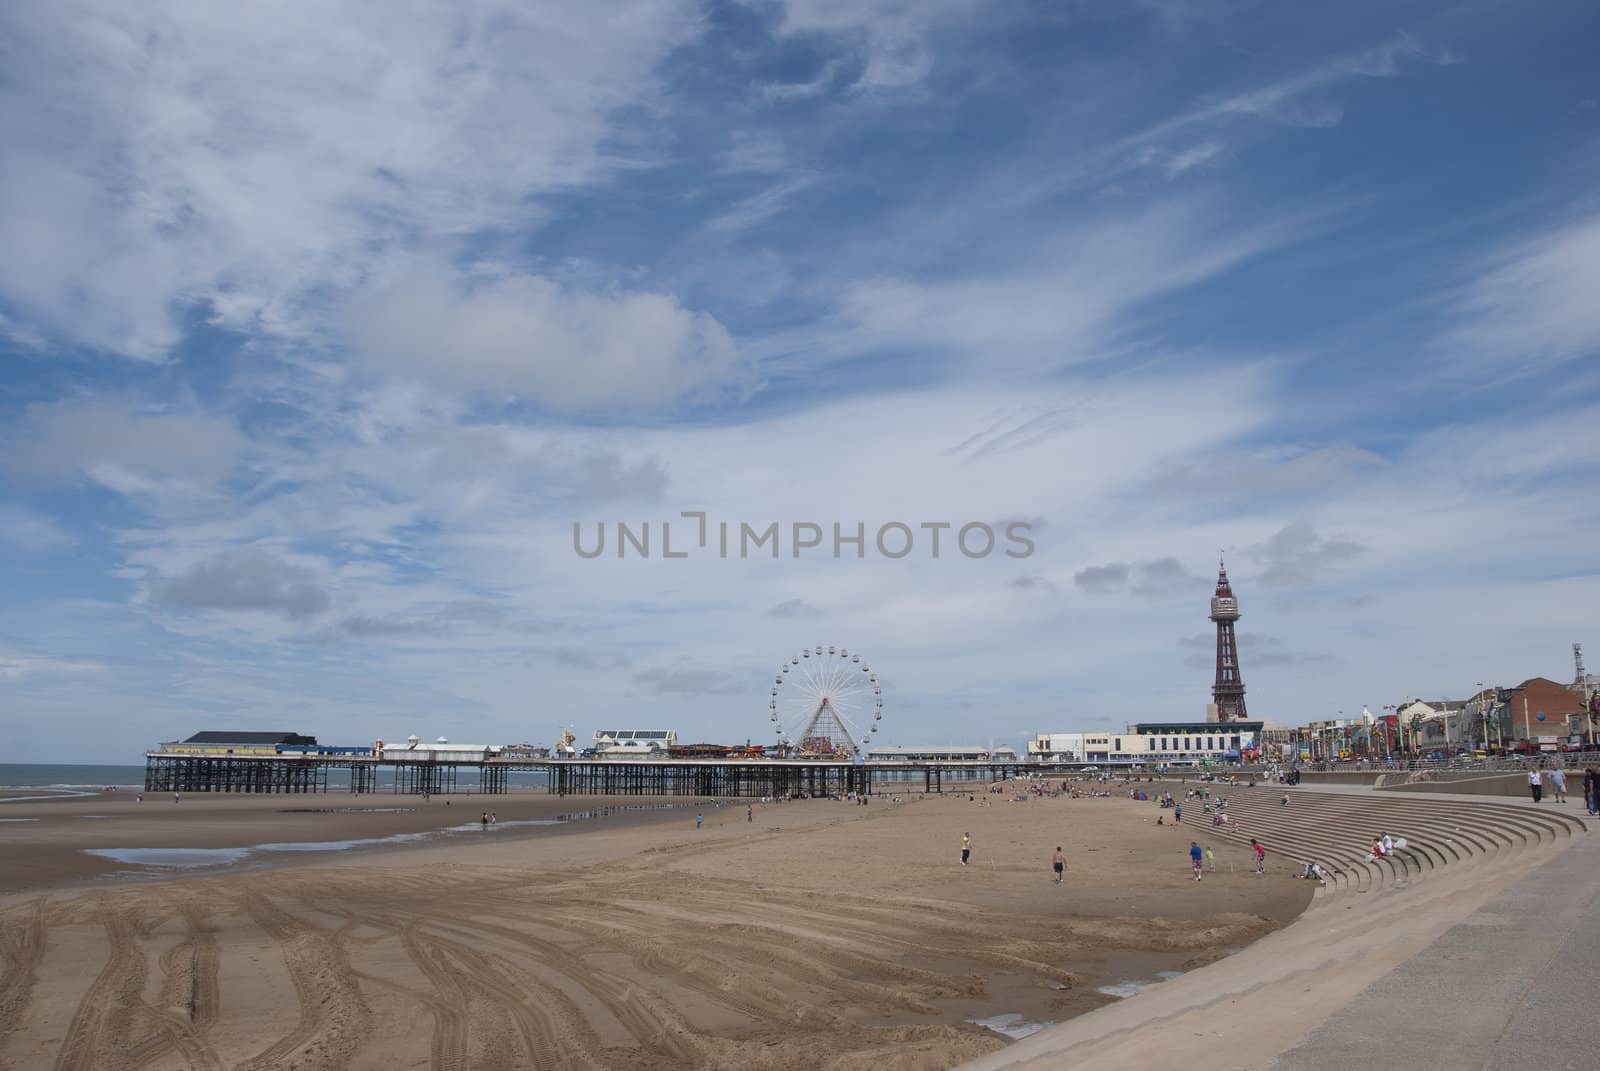 Central Pier and Blackpool Tower from the beach under a blue sky